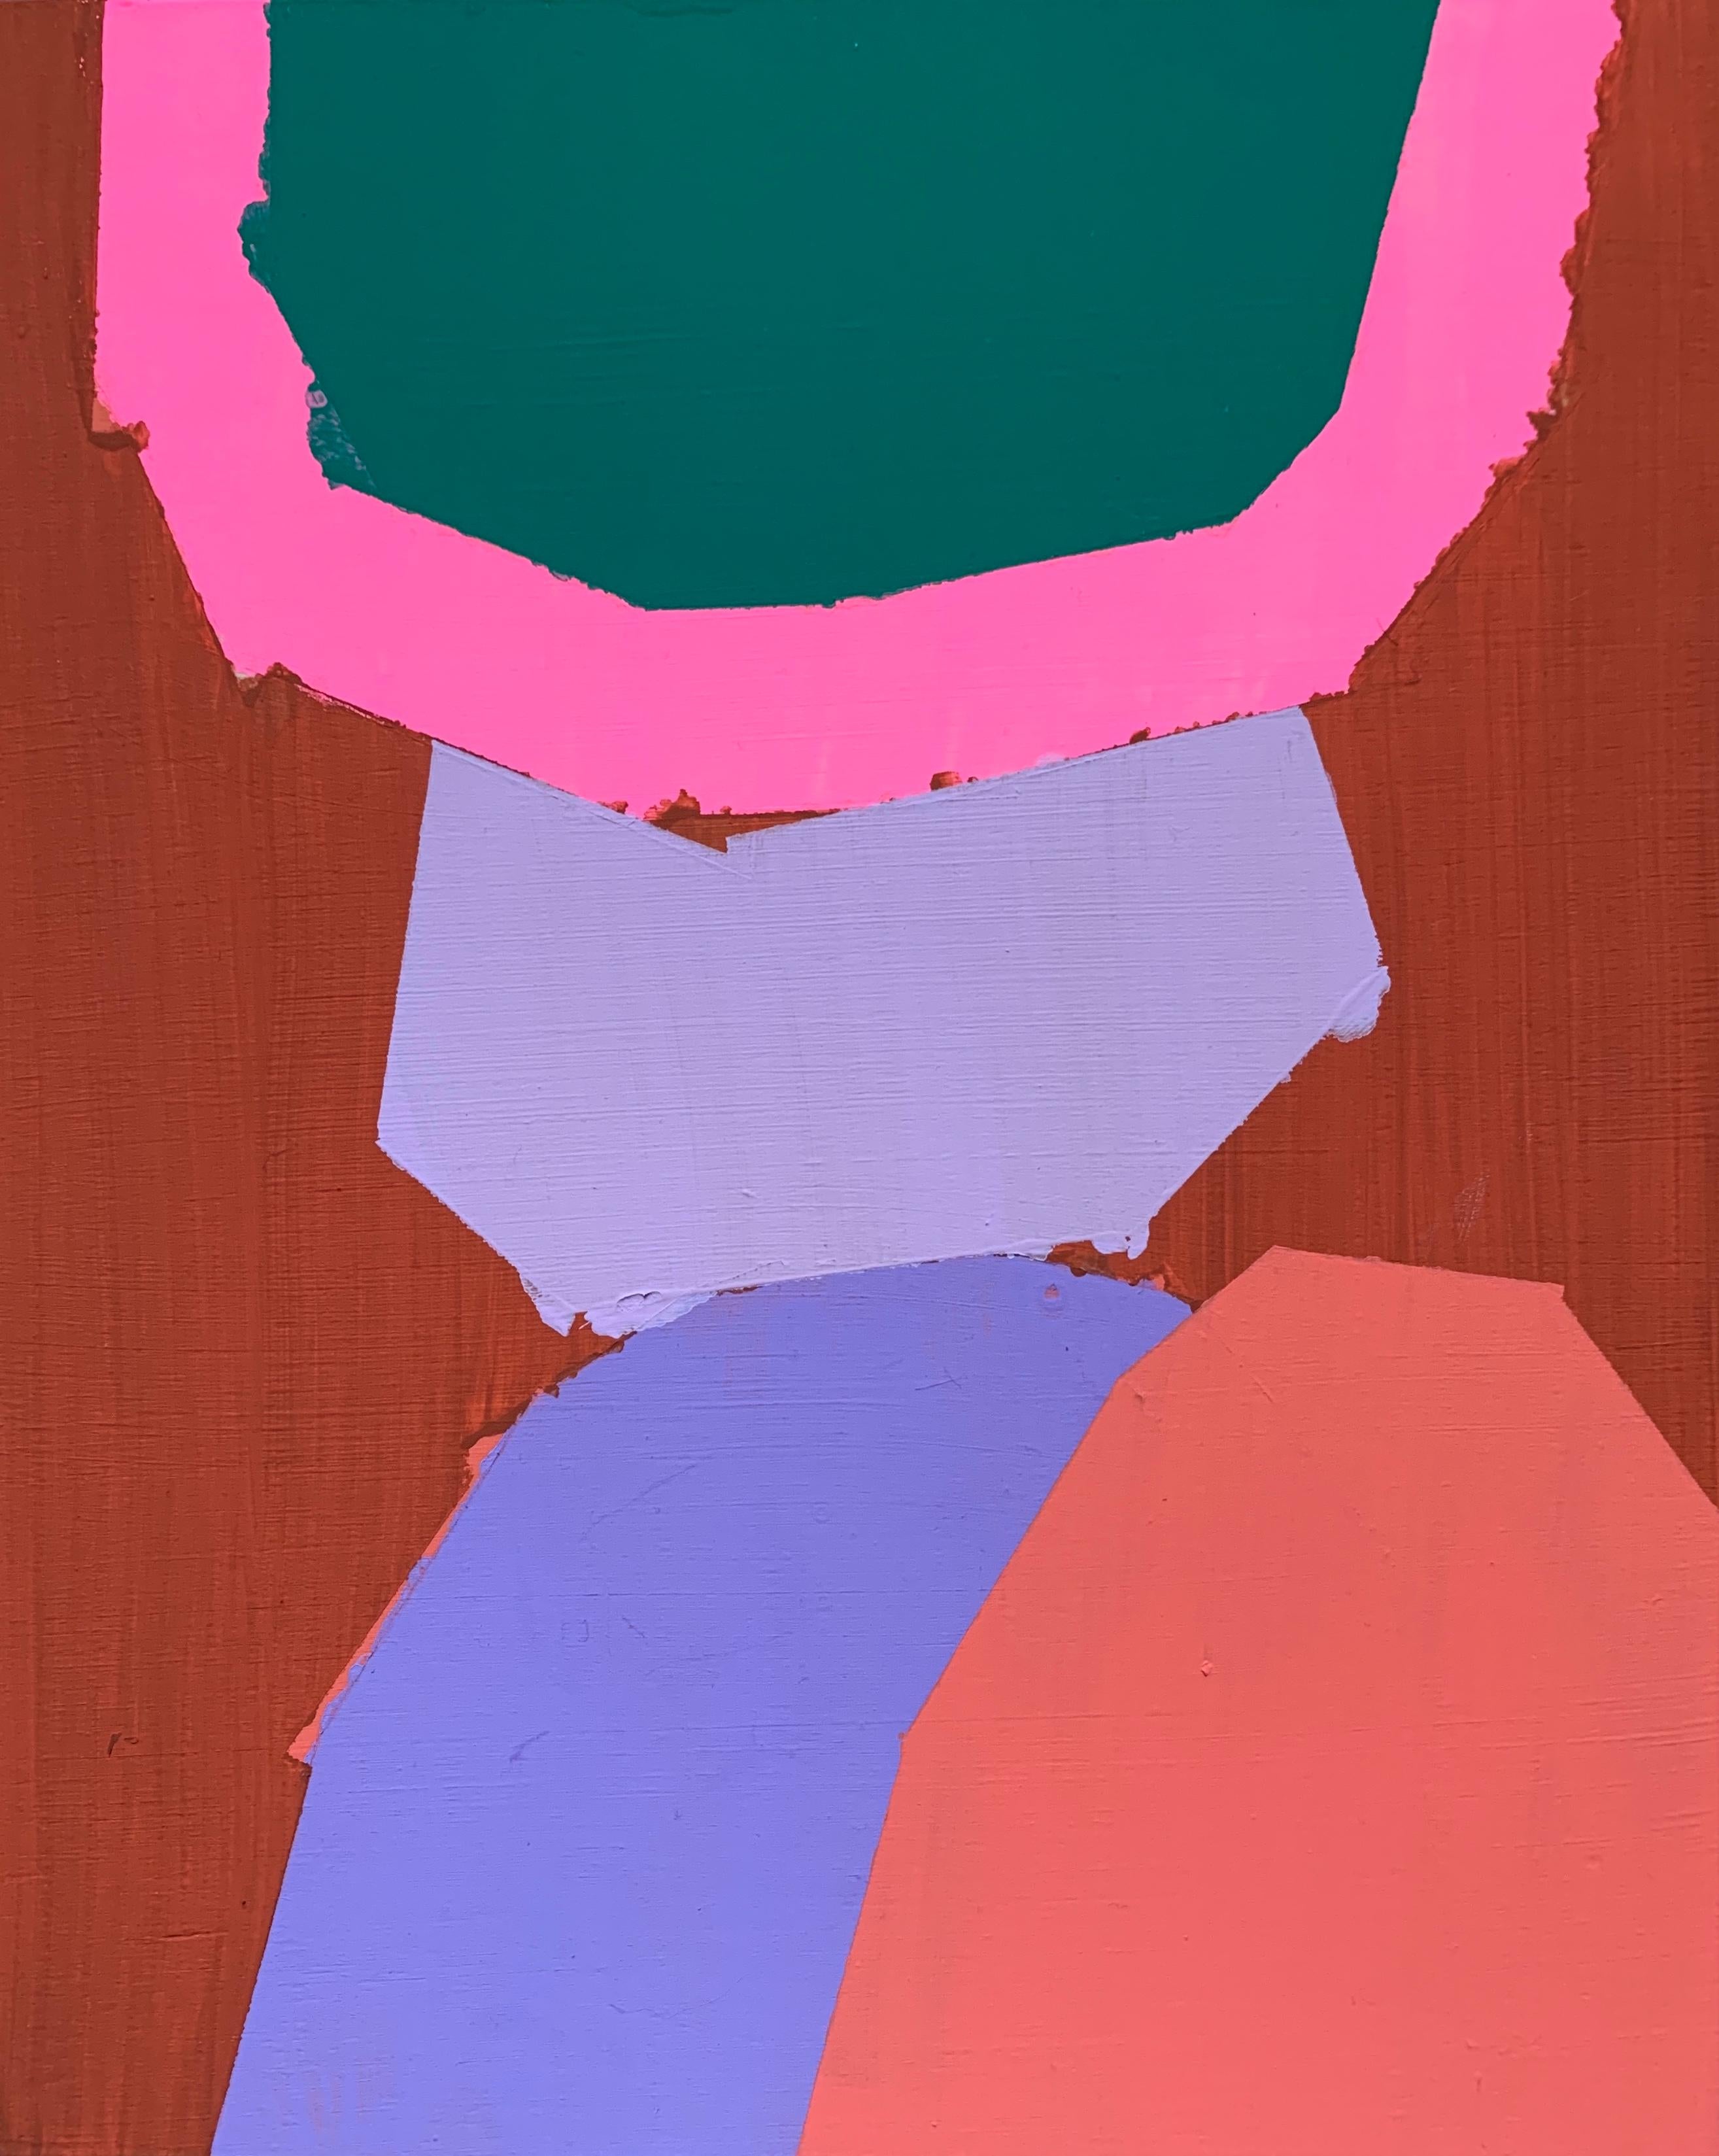 Liz Rundorff Smith Abstract Painting - Cake, abstract geometric painting on panel, pink, purple and green, 10" x 8"